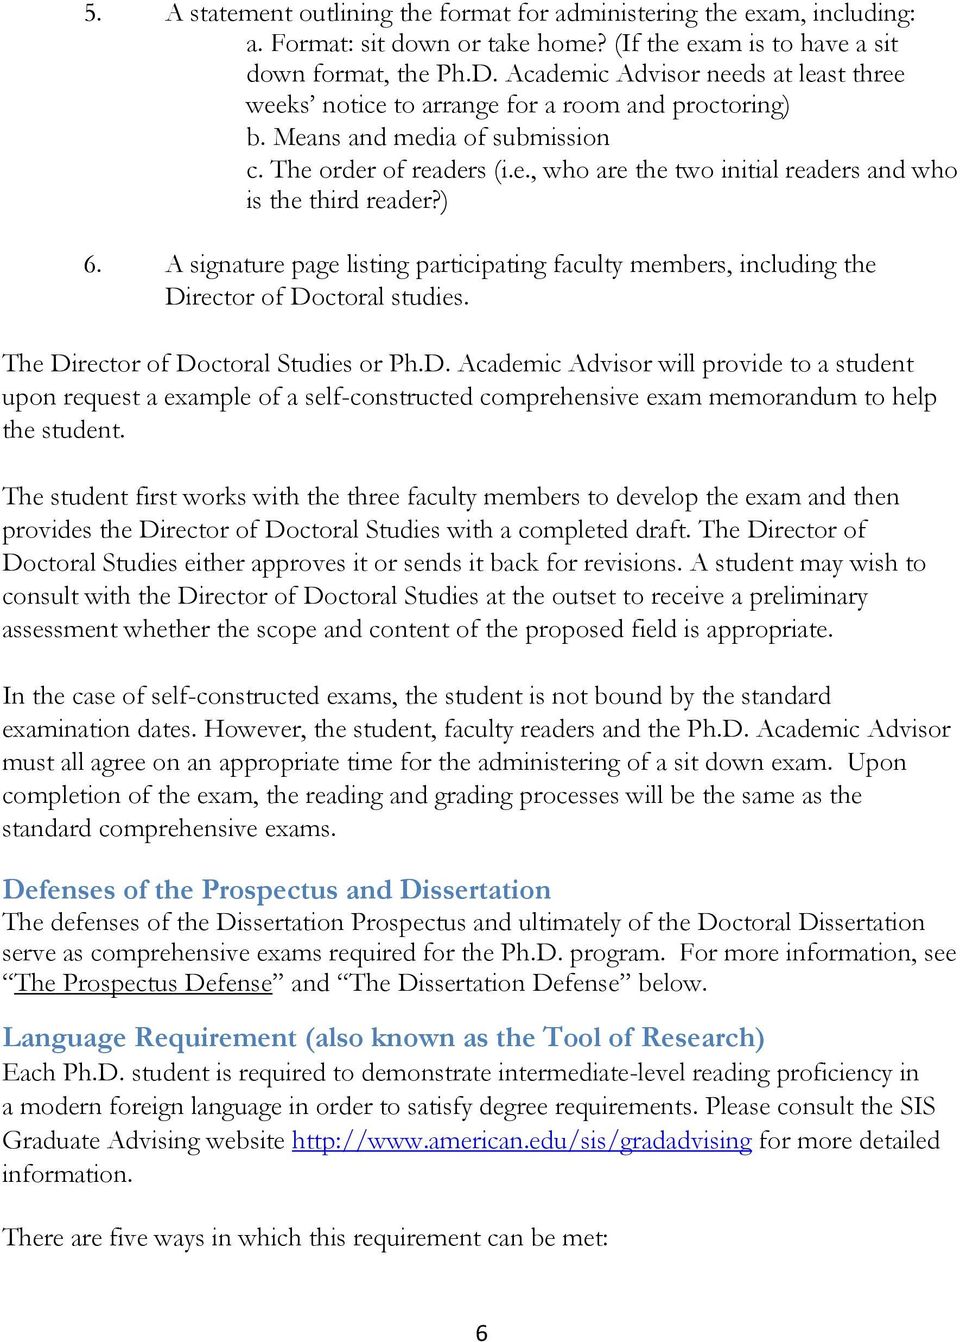 ) 6. A signature page listing participating faculty members, including the Di